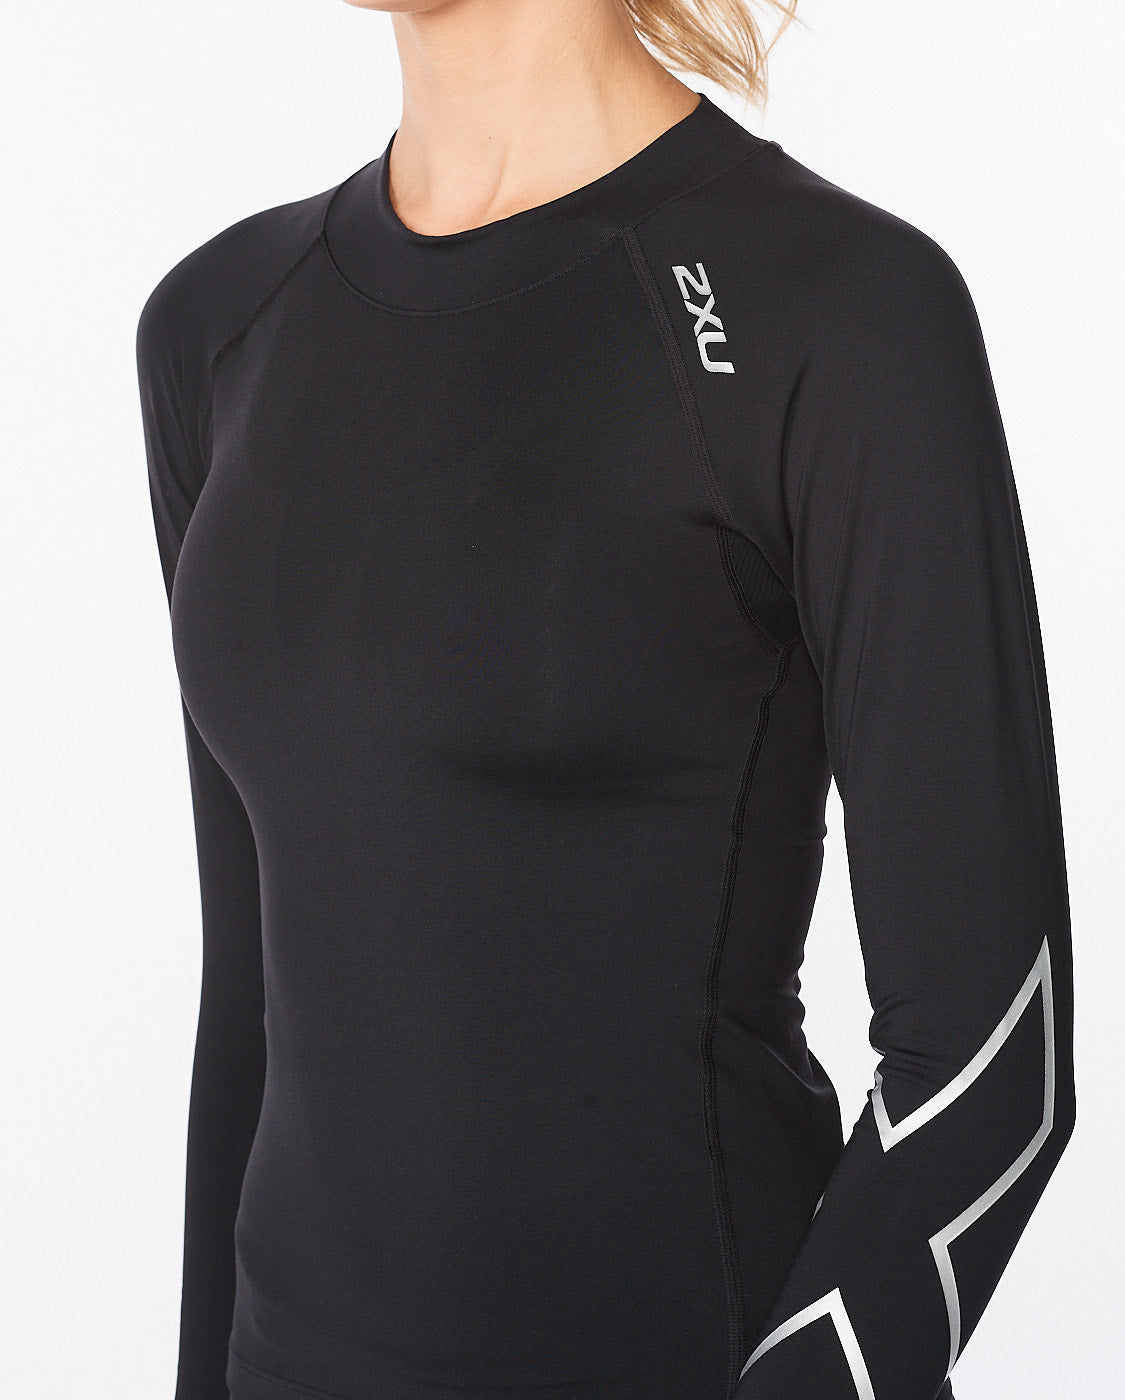 Ignition Compression Long Sleeve – 2XU